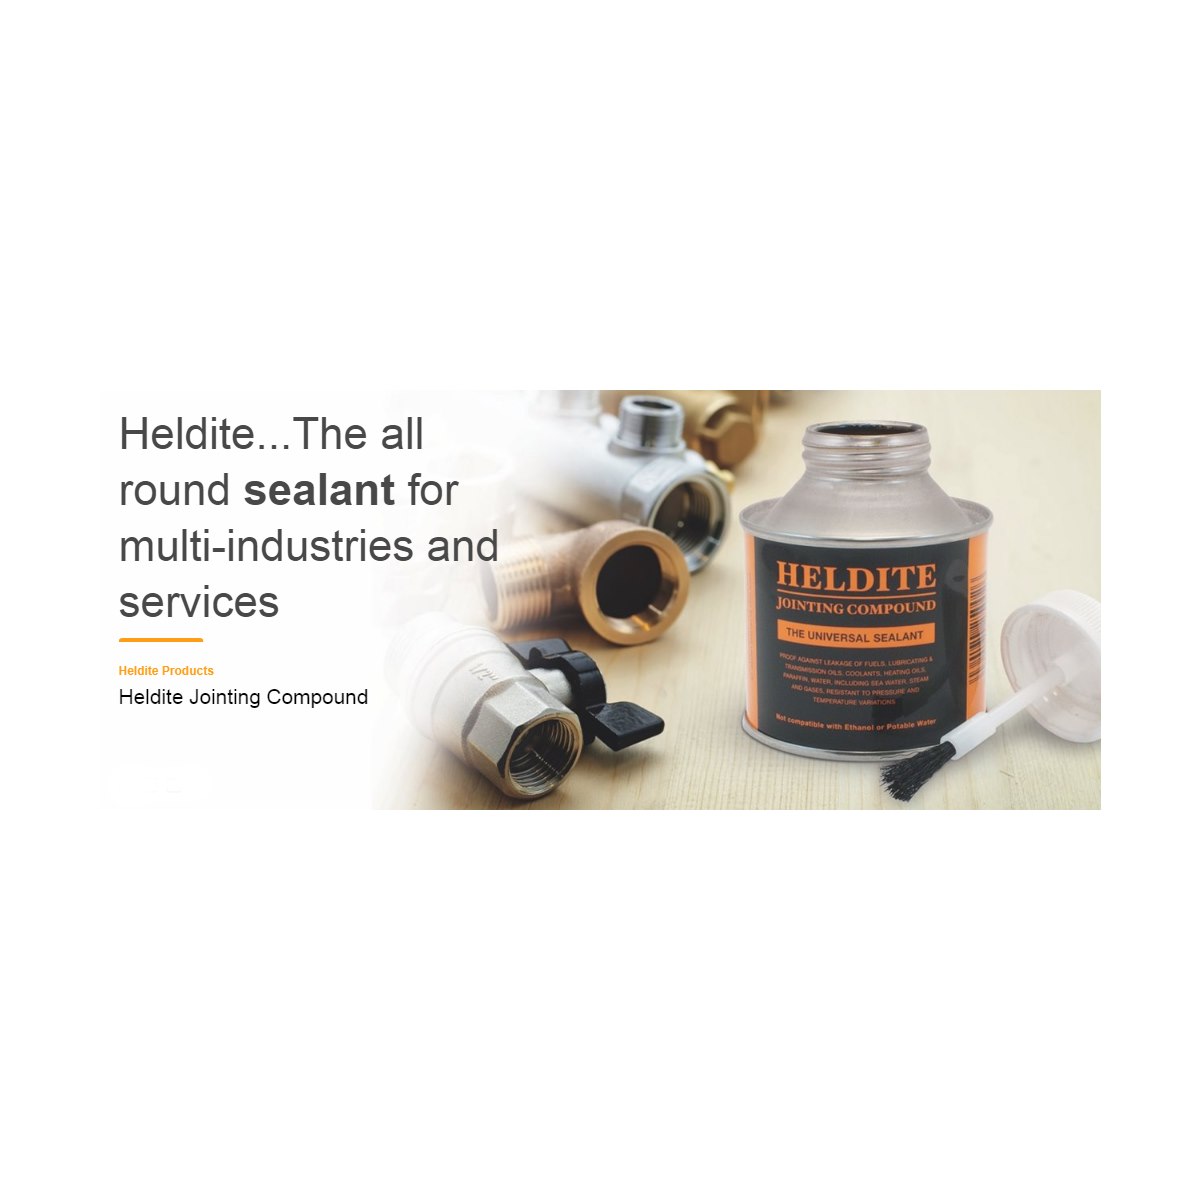 Heldite Jointing Compound and Pipe Sealer